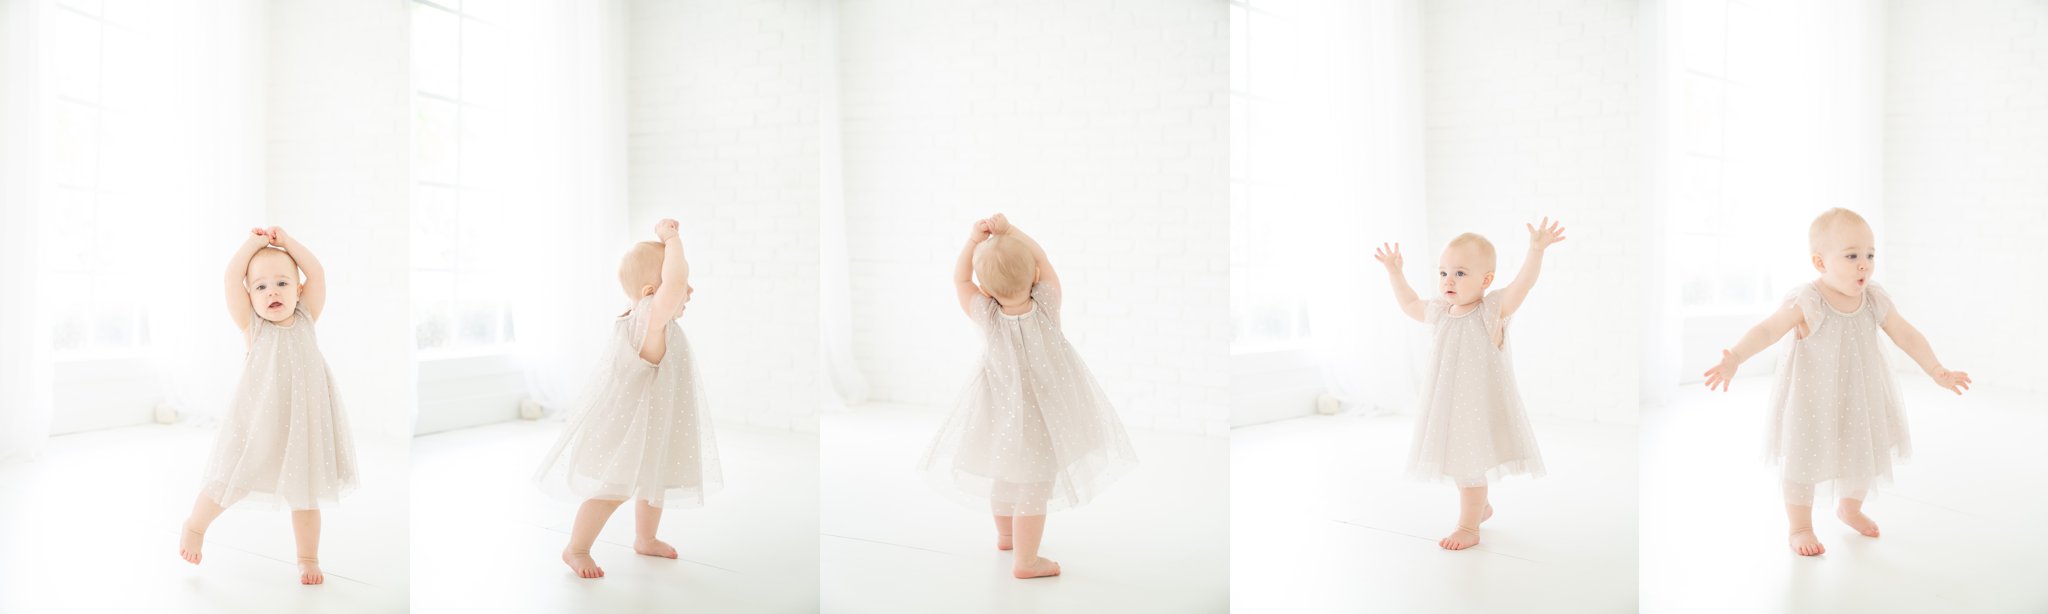 baby twirling in a sparkly silver dress in jupiter florida photography studio